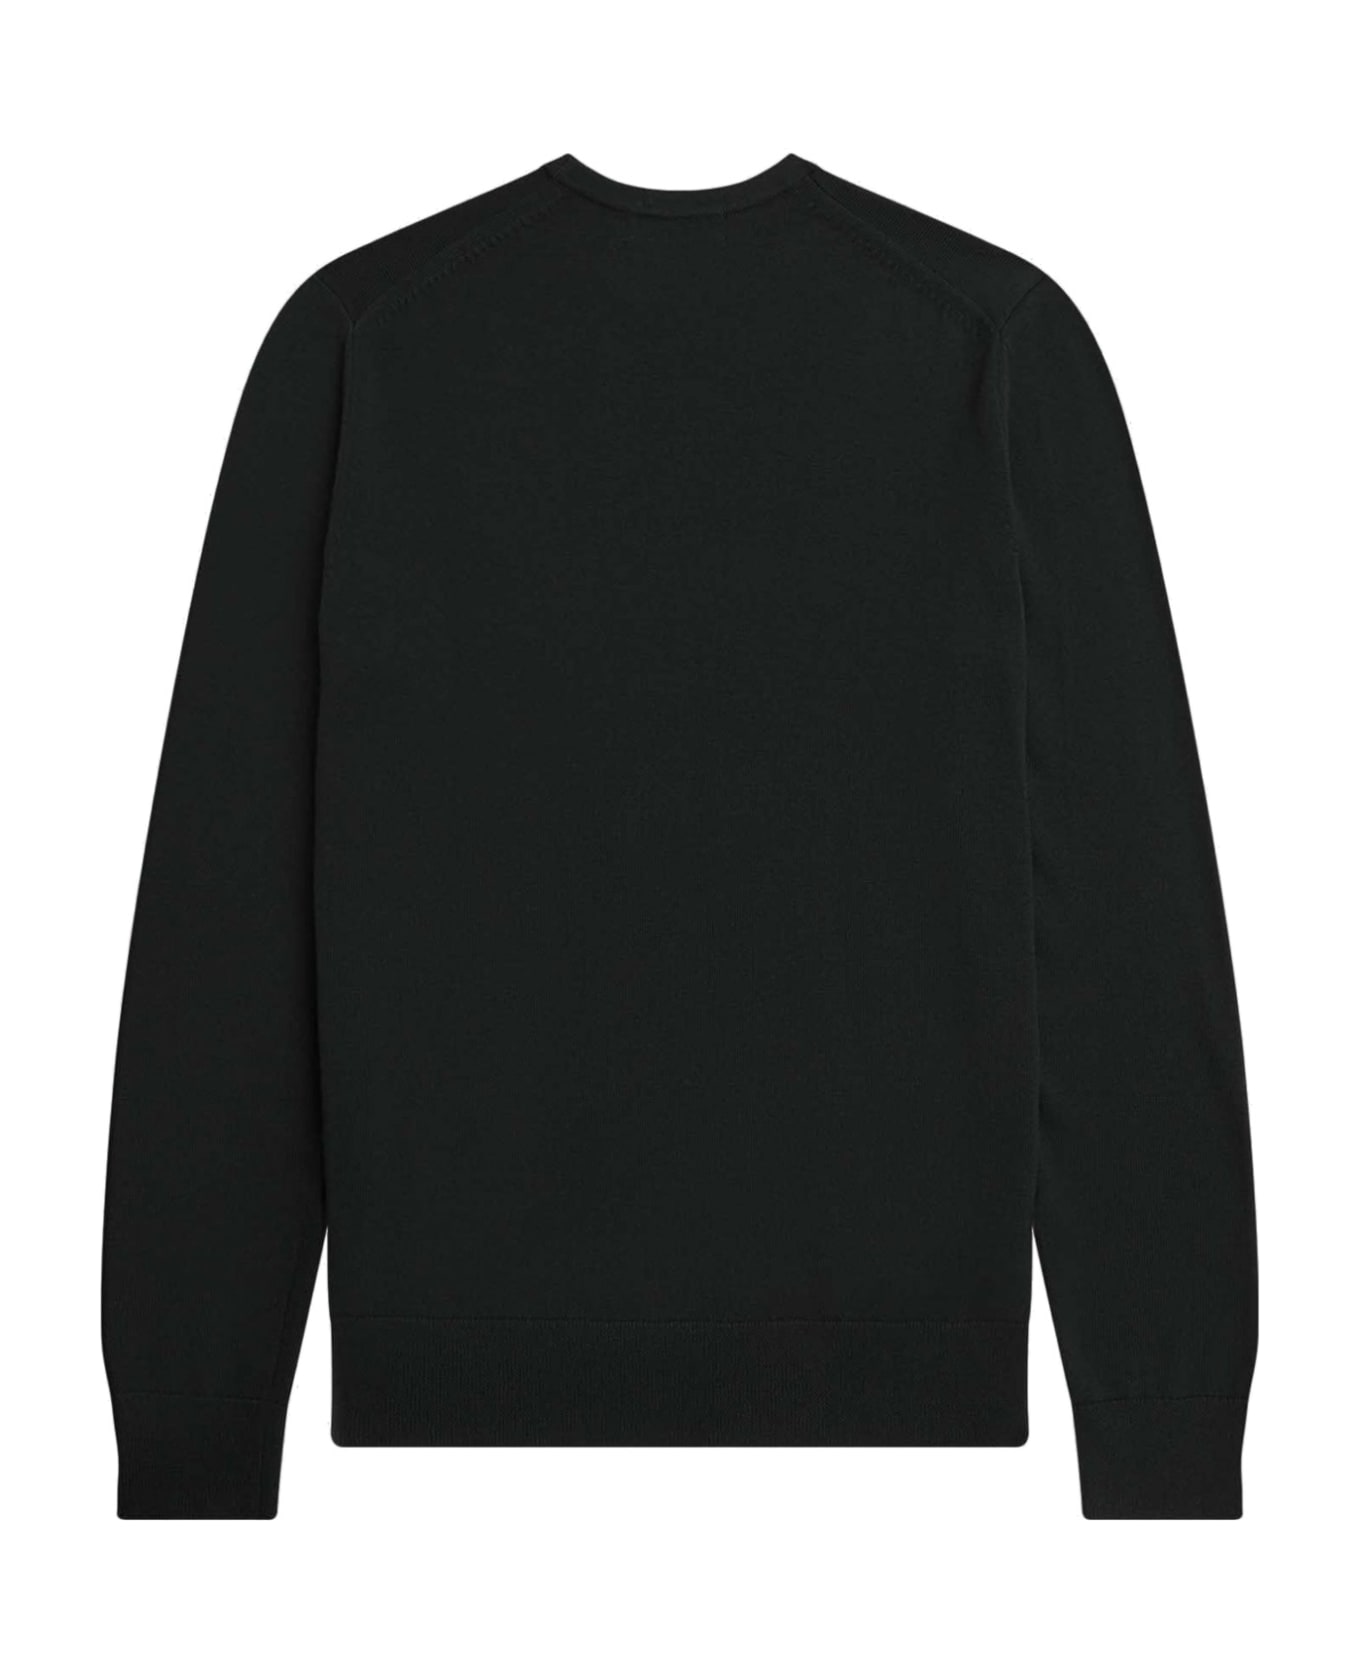 Fred Perry Sweater - Black